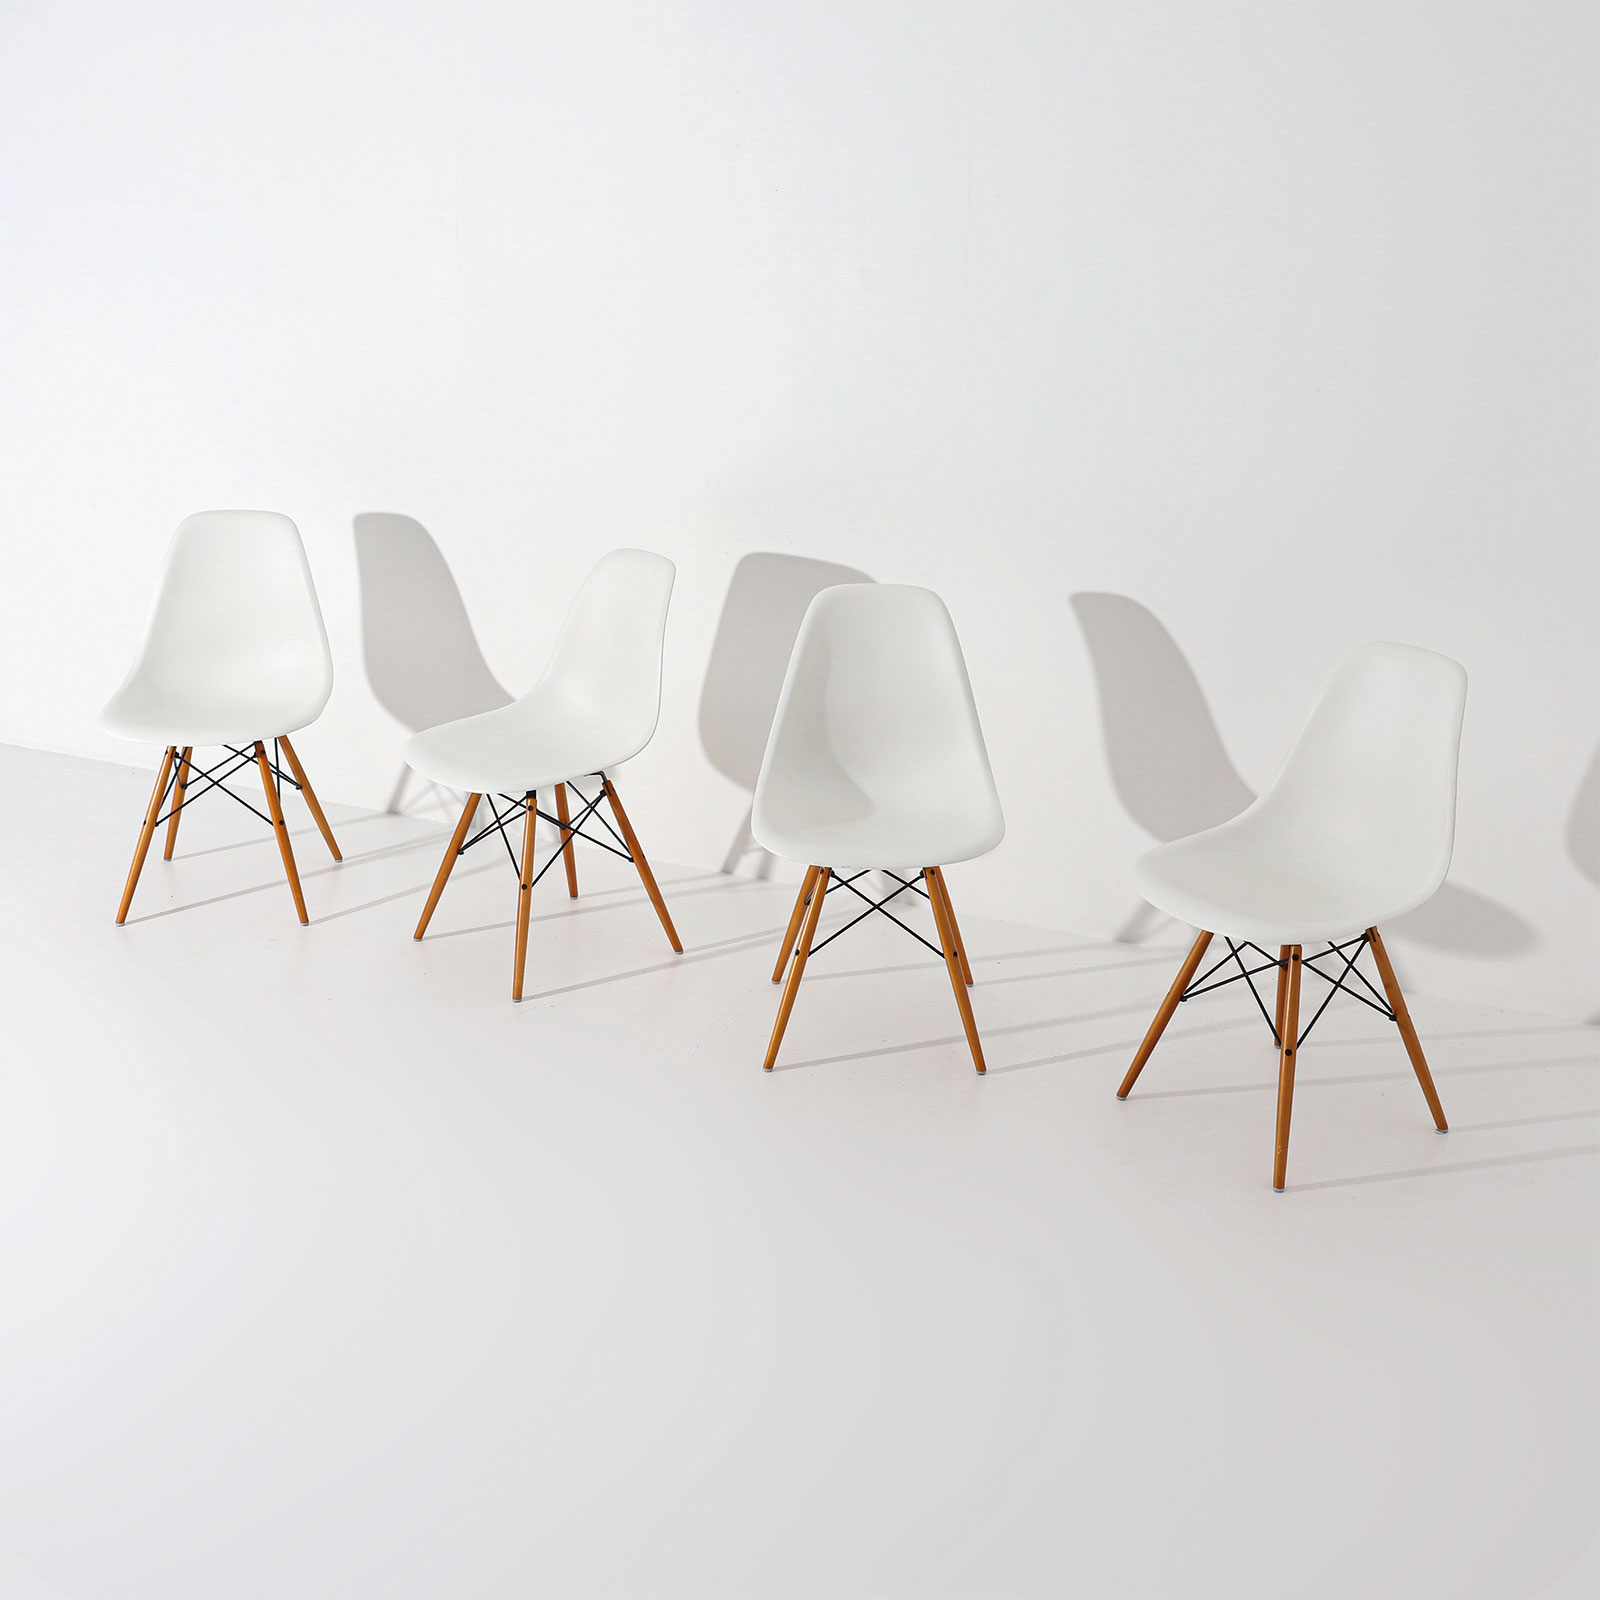 Eames DSW Vitra chairs